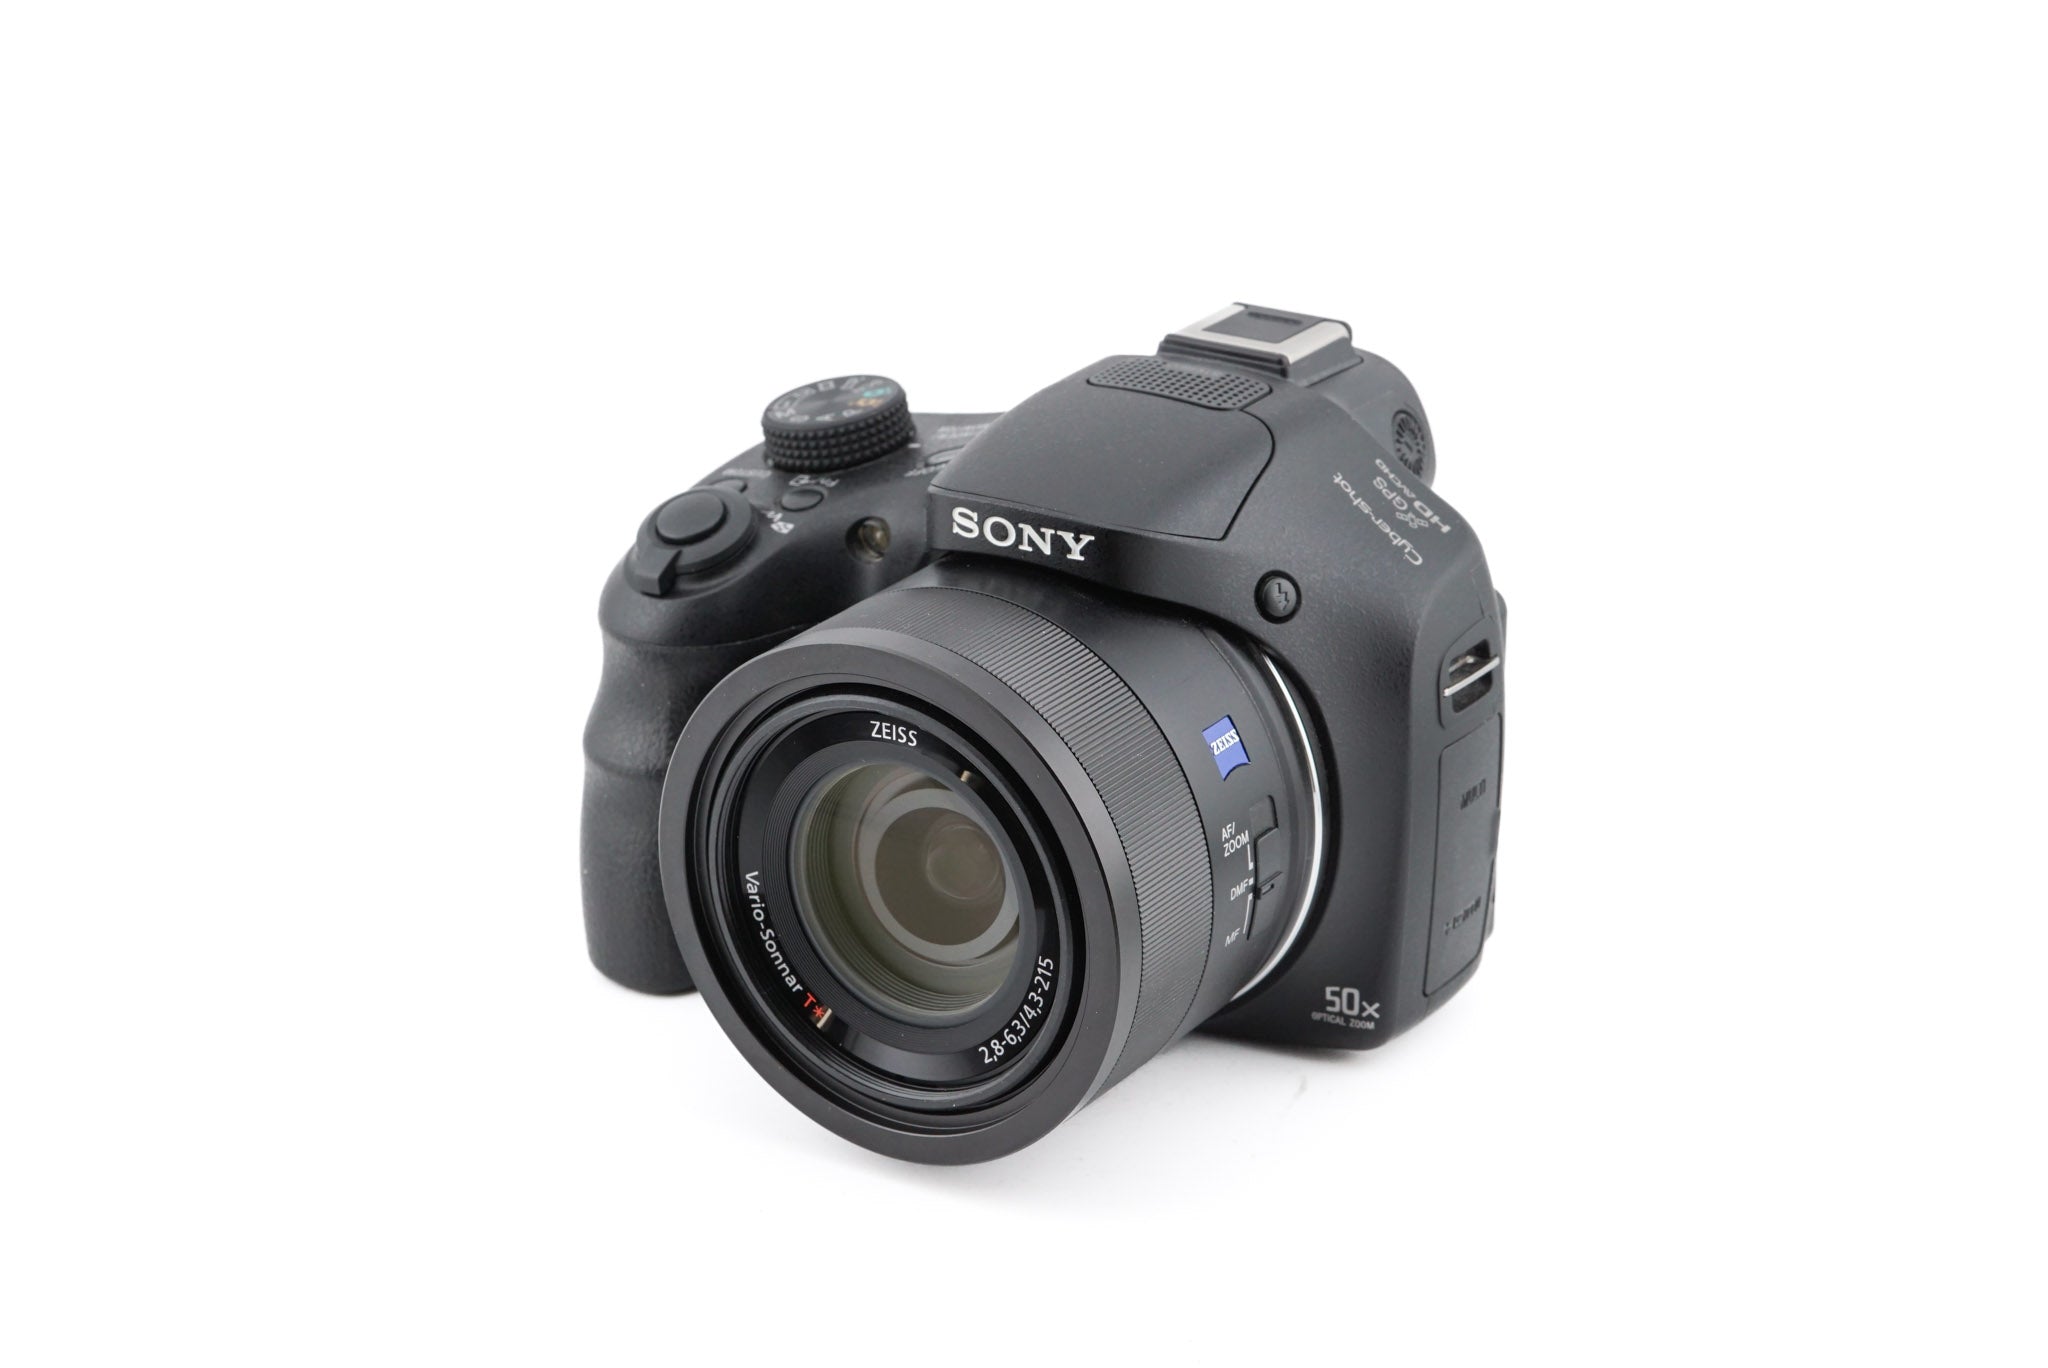 Sony Cybershot DSC HX350 camera review: 50x optical zoom? Why not